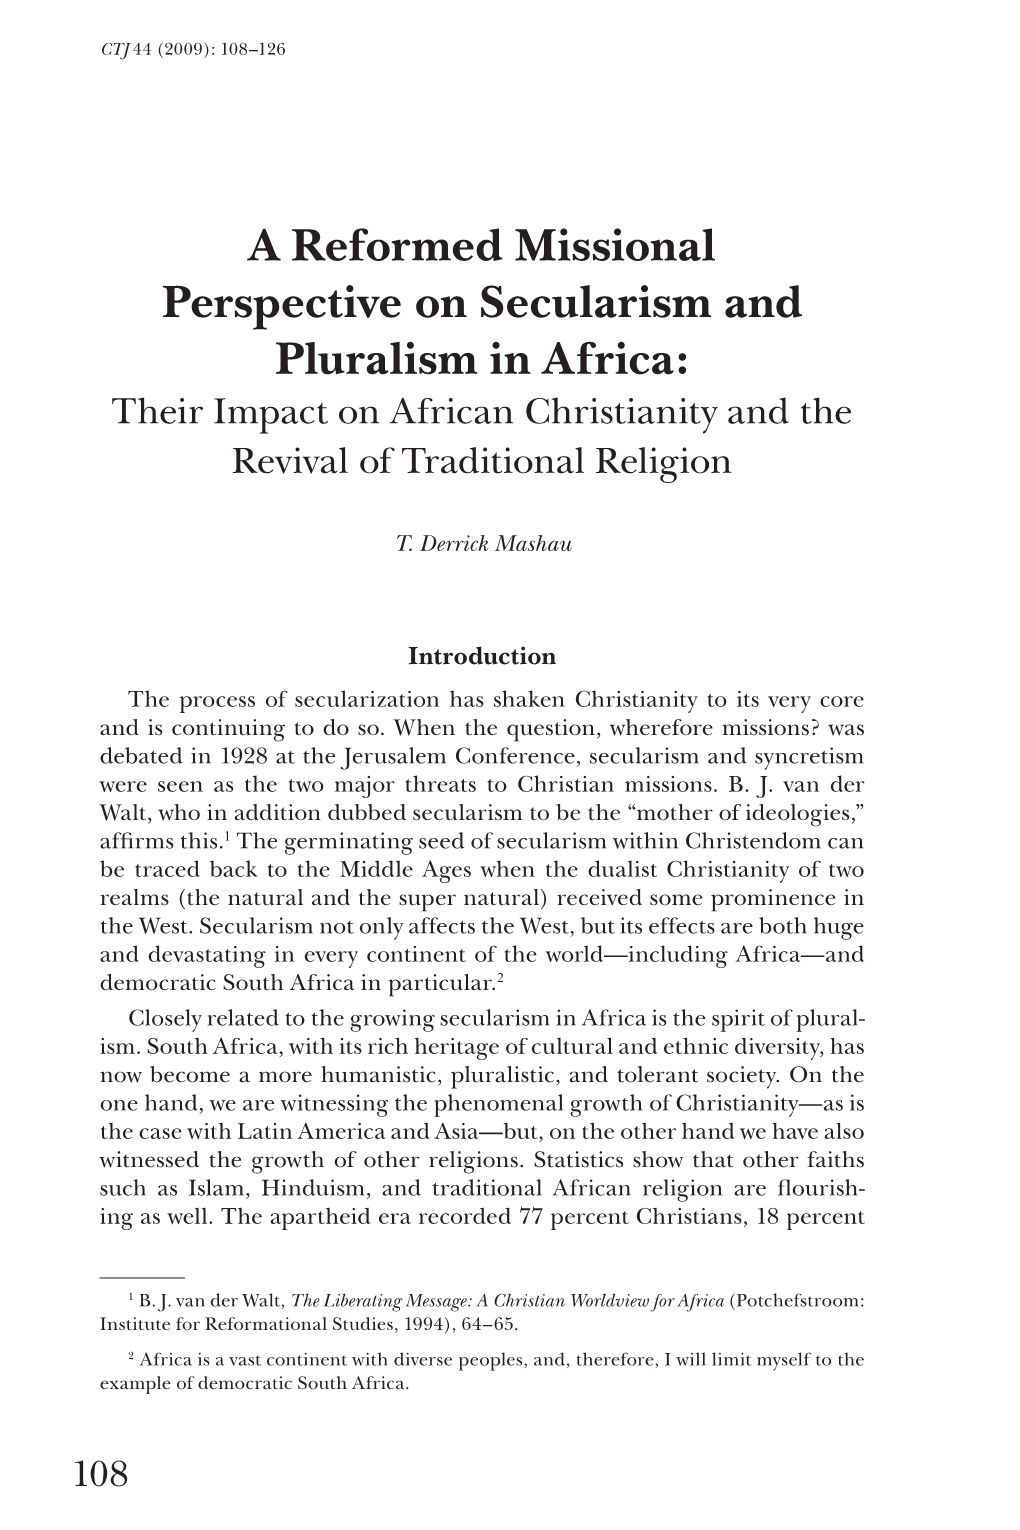 A Reformed Missional Perspective on Secularism and Pluralism in Africa: Their Impact on African Christianity and the Revival of Traditional Religion